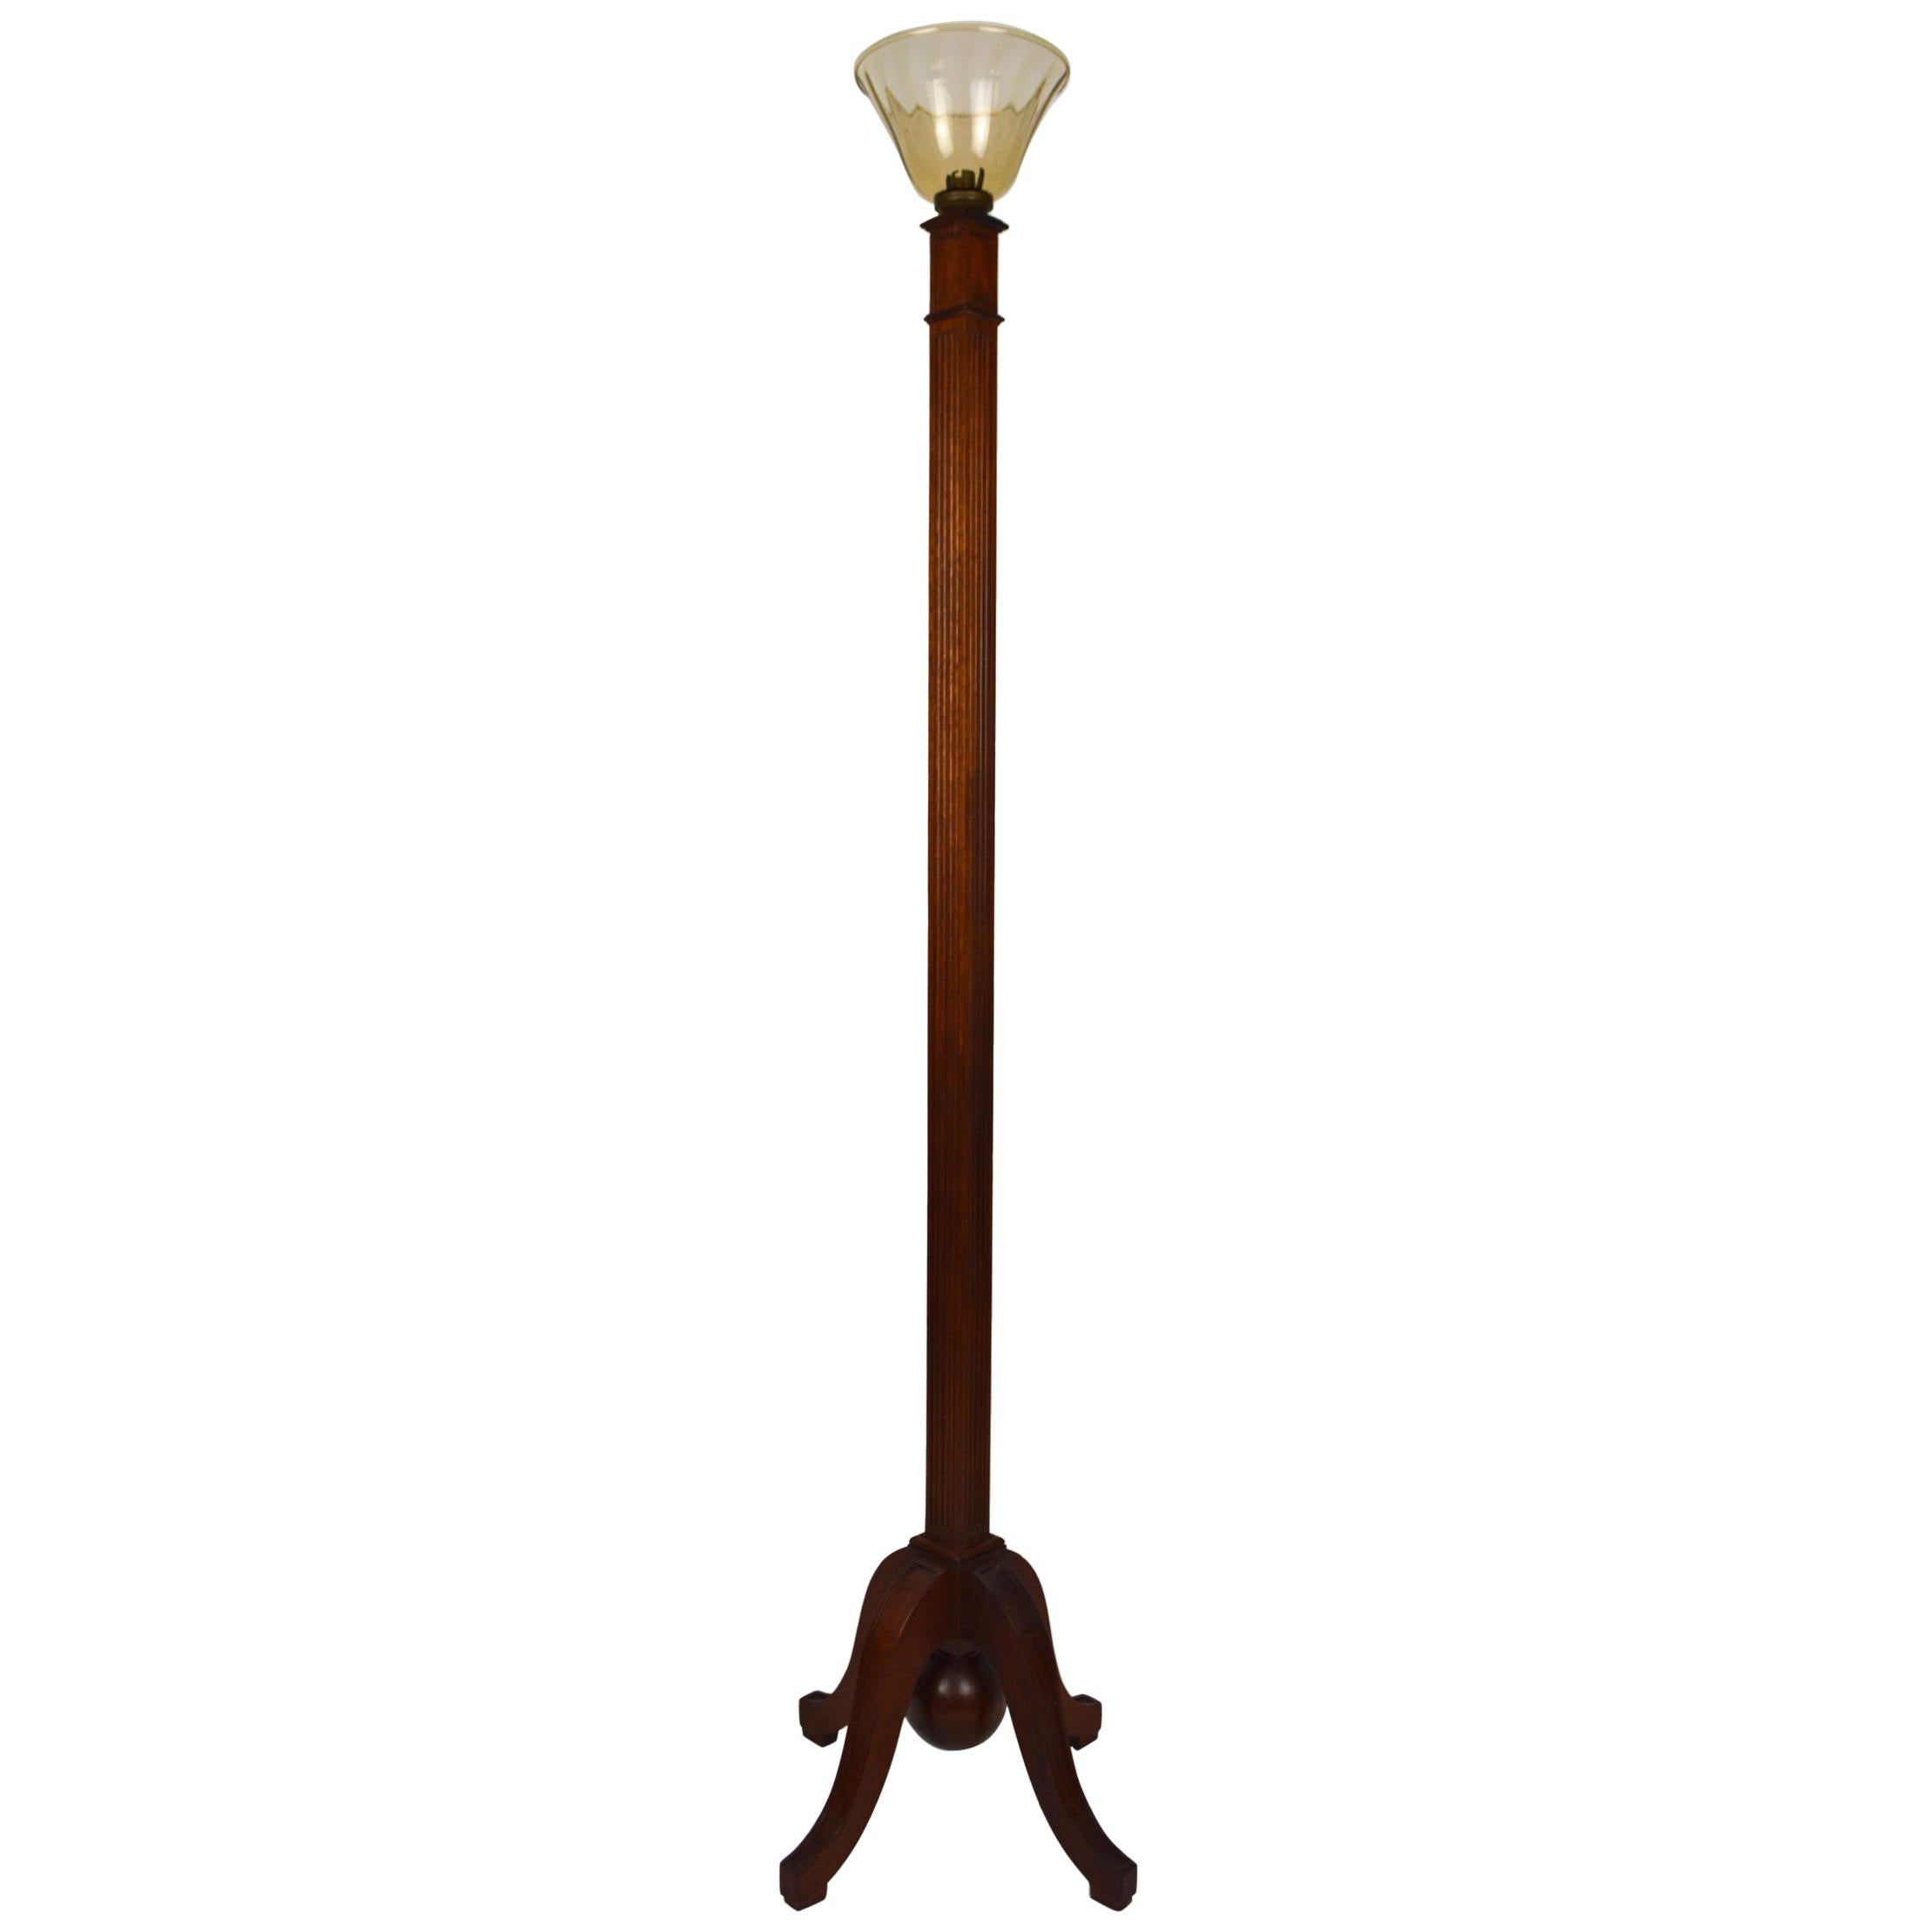 Art Deco Wood Carved Torchiere Floor Lamp, France, circa 1930 For Sale